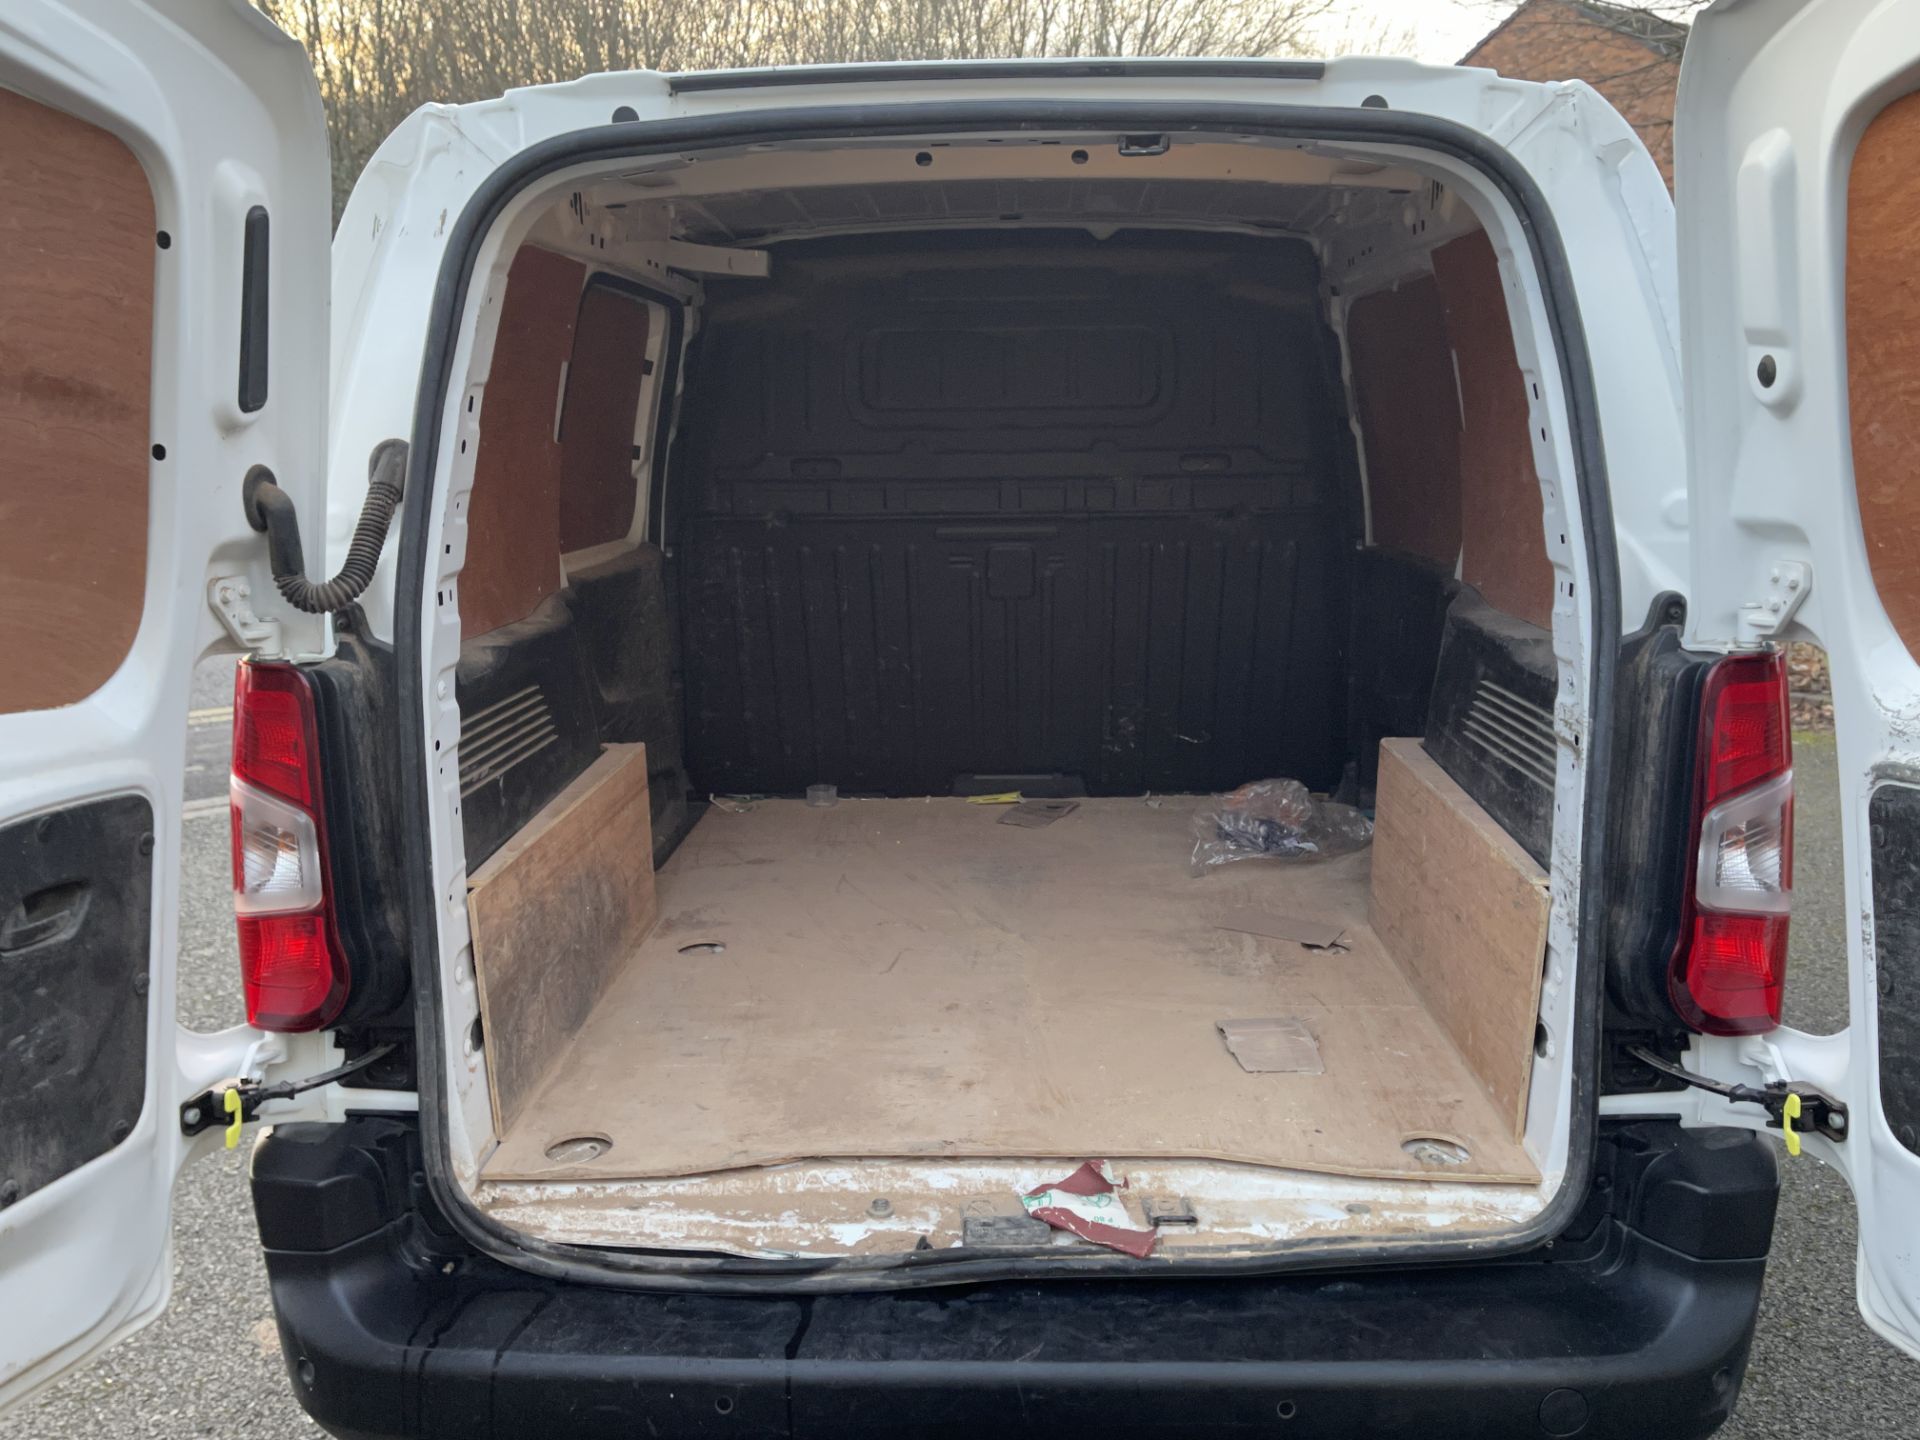 2021 - Vauxhall Combo Cargo 2000 L1 H1 Dynamic 1,499cc Turbo Diesel - Image 21 of 26